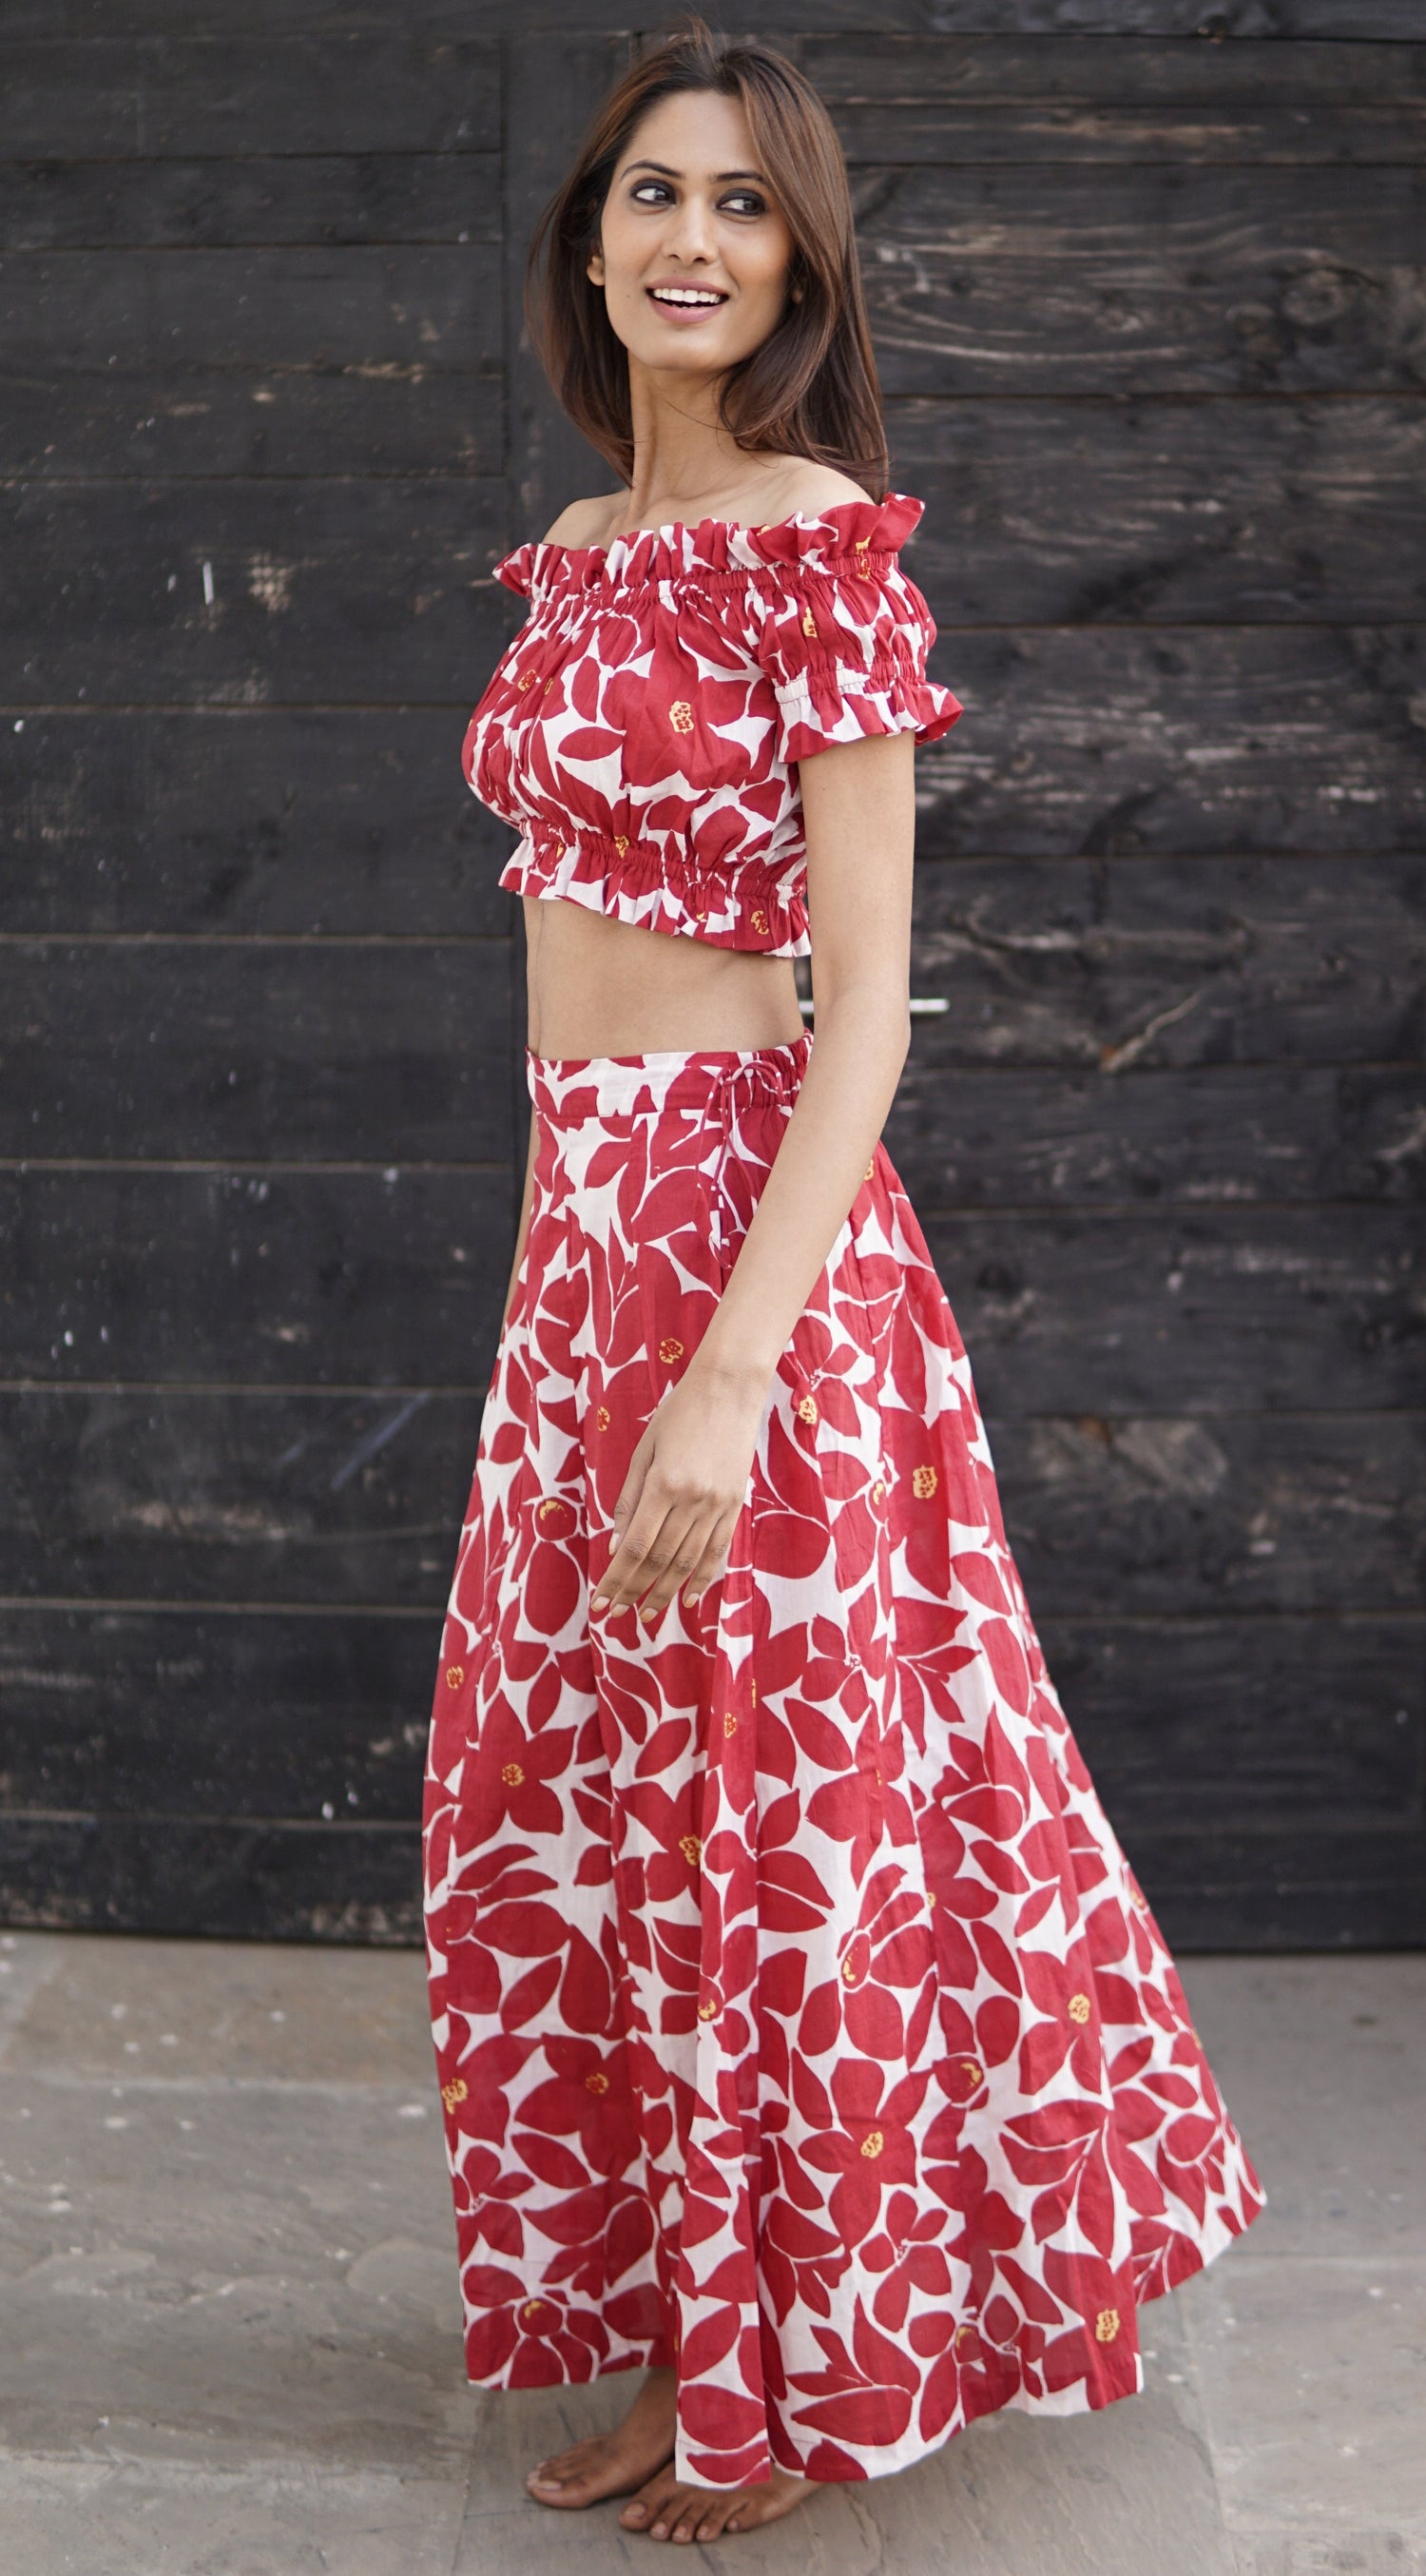 Co-ord set, red and cream cotton skirt and top, Carmen summer co-ord set